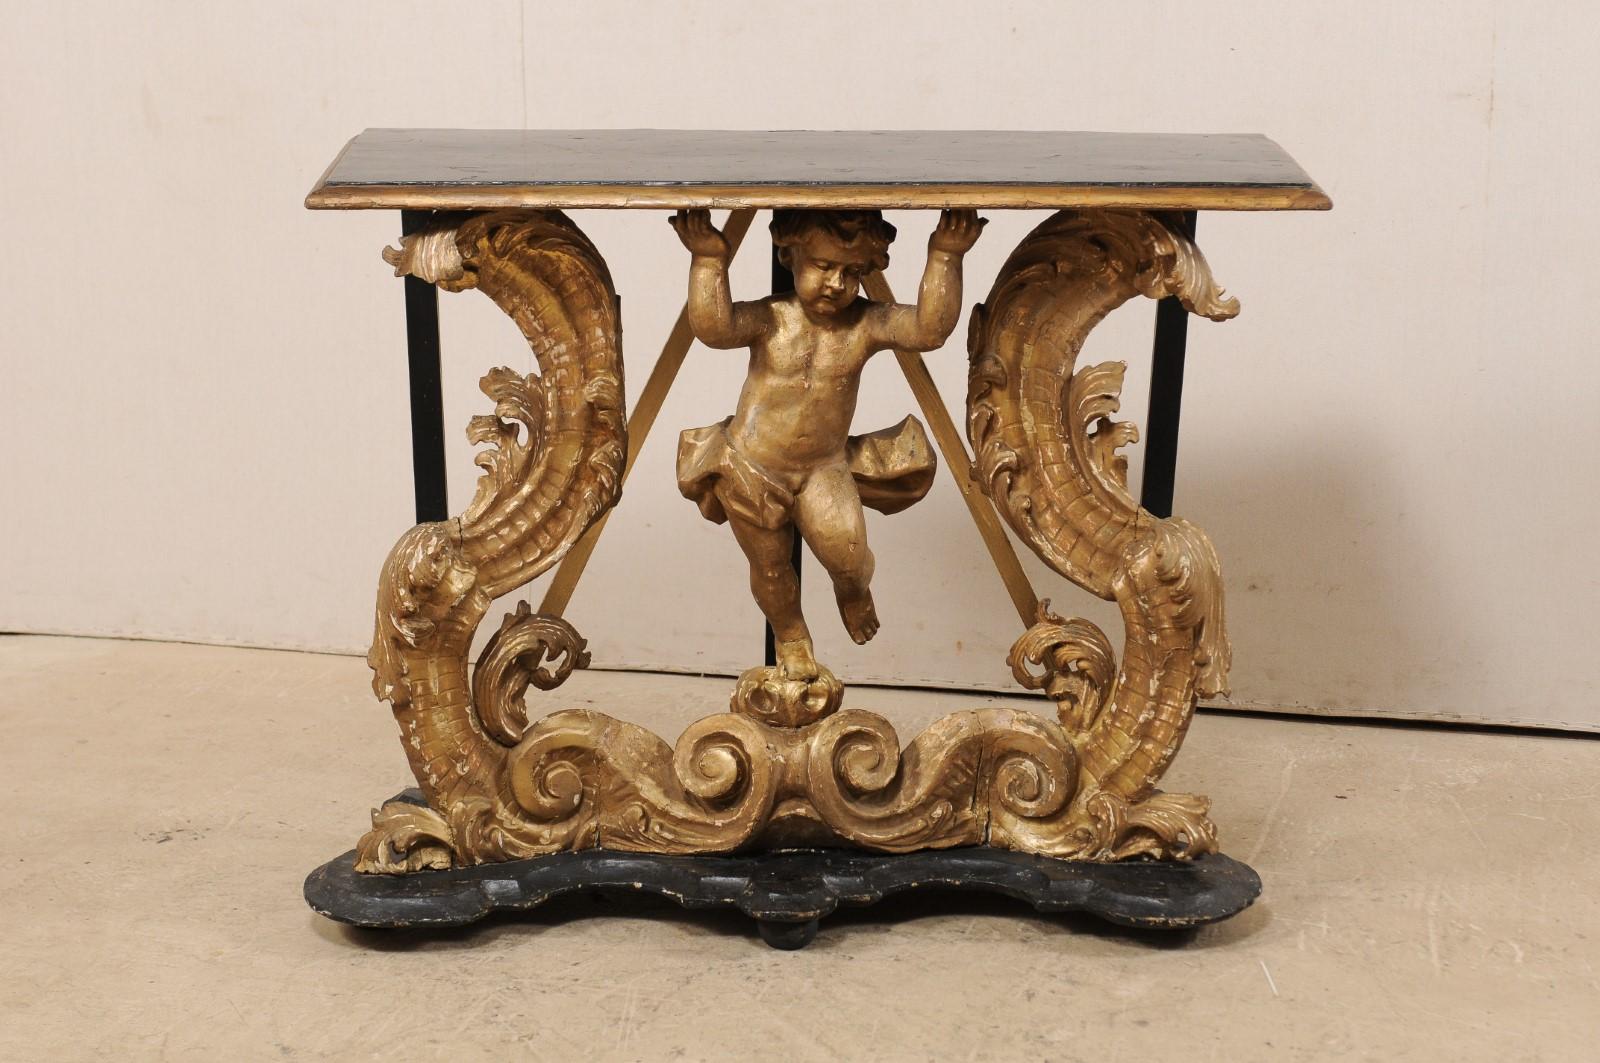 An exquisite Italian Rococo carved wood and gilt console table with putto from the early 18th century, possibly 17th century. This period Rococo wall console from Italy features a three-dimensionally hand carved wood putto, with loincloth loosely